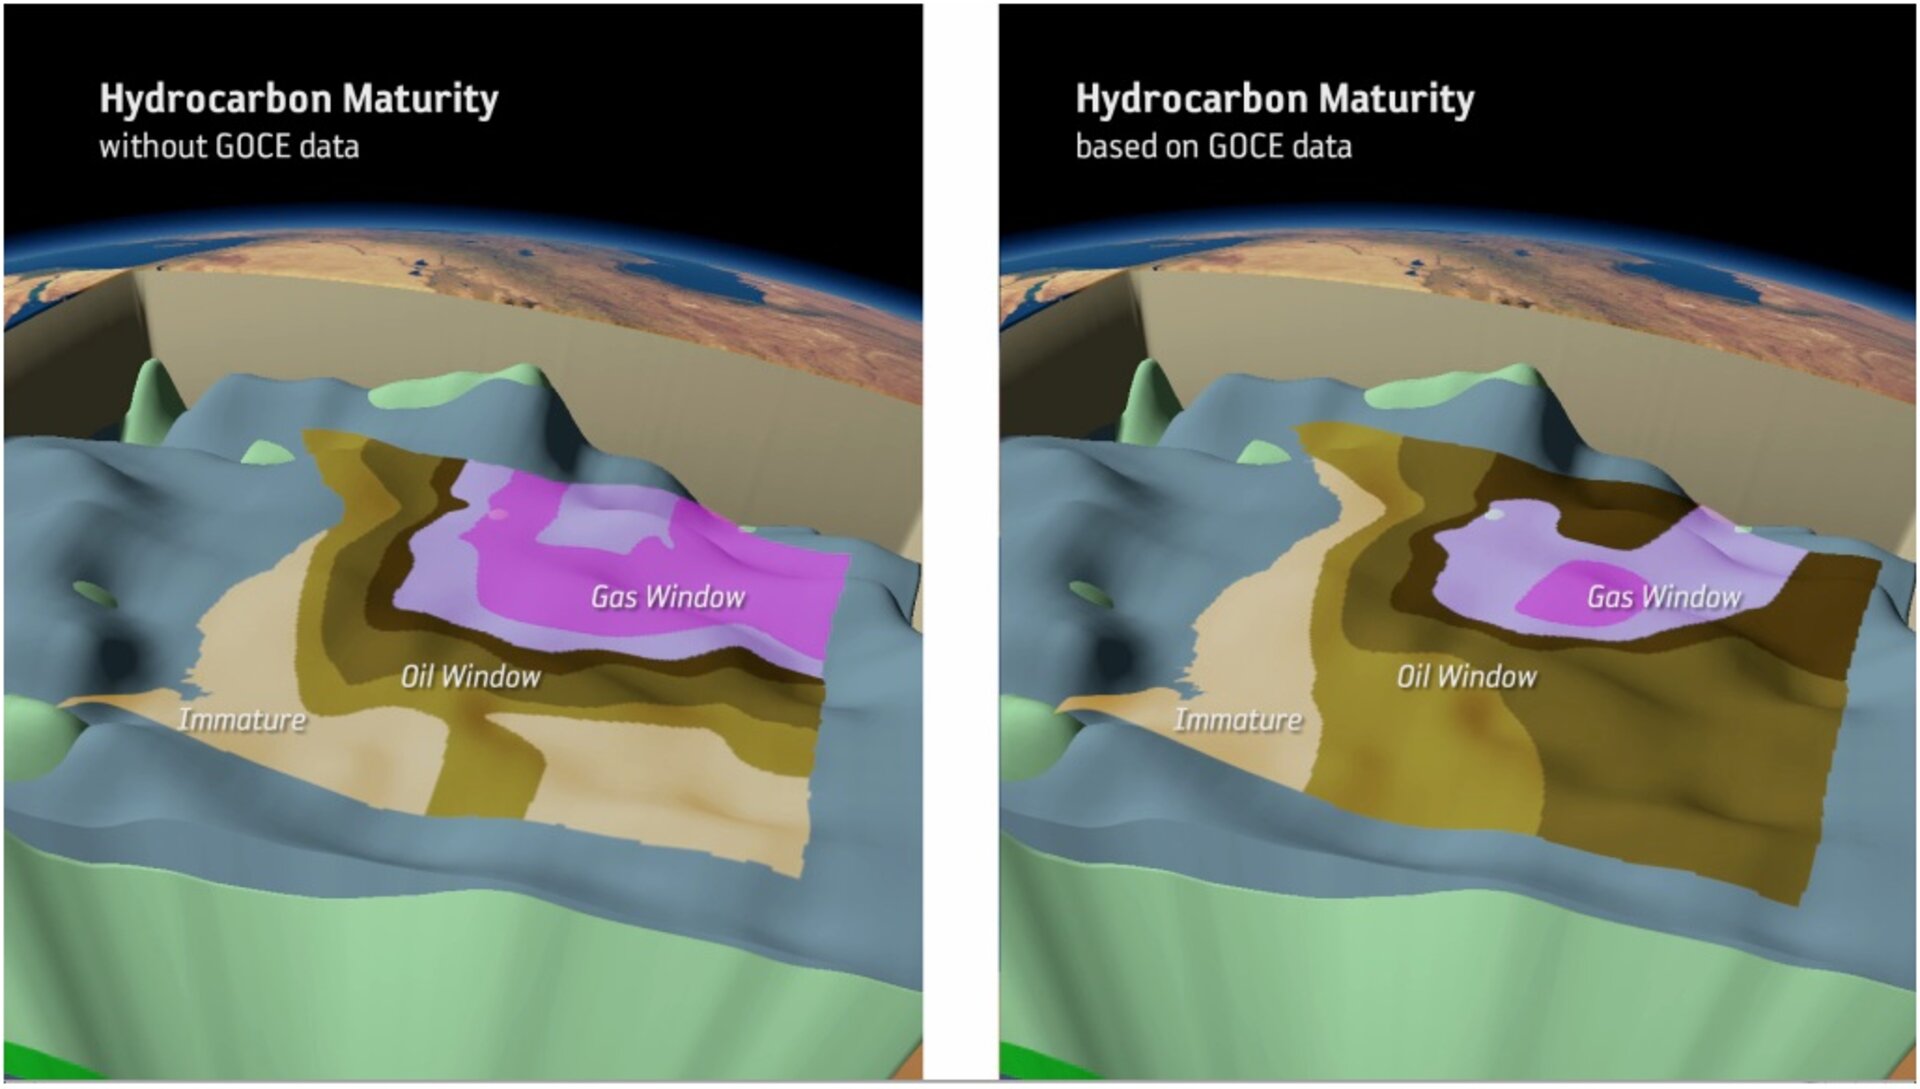 Pinpointing hyrodcarbon maturity